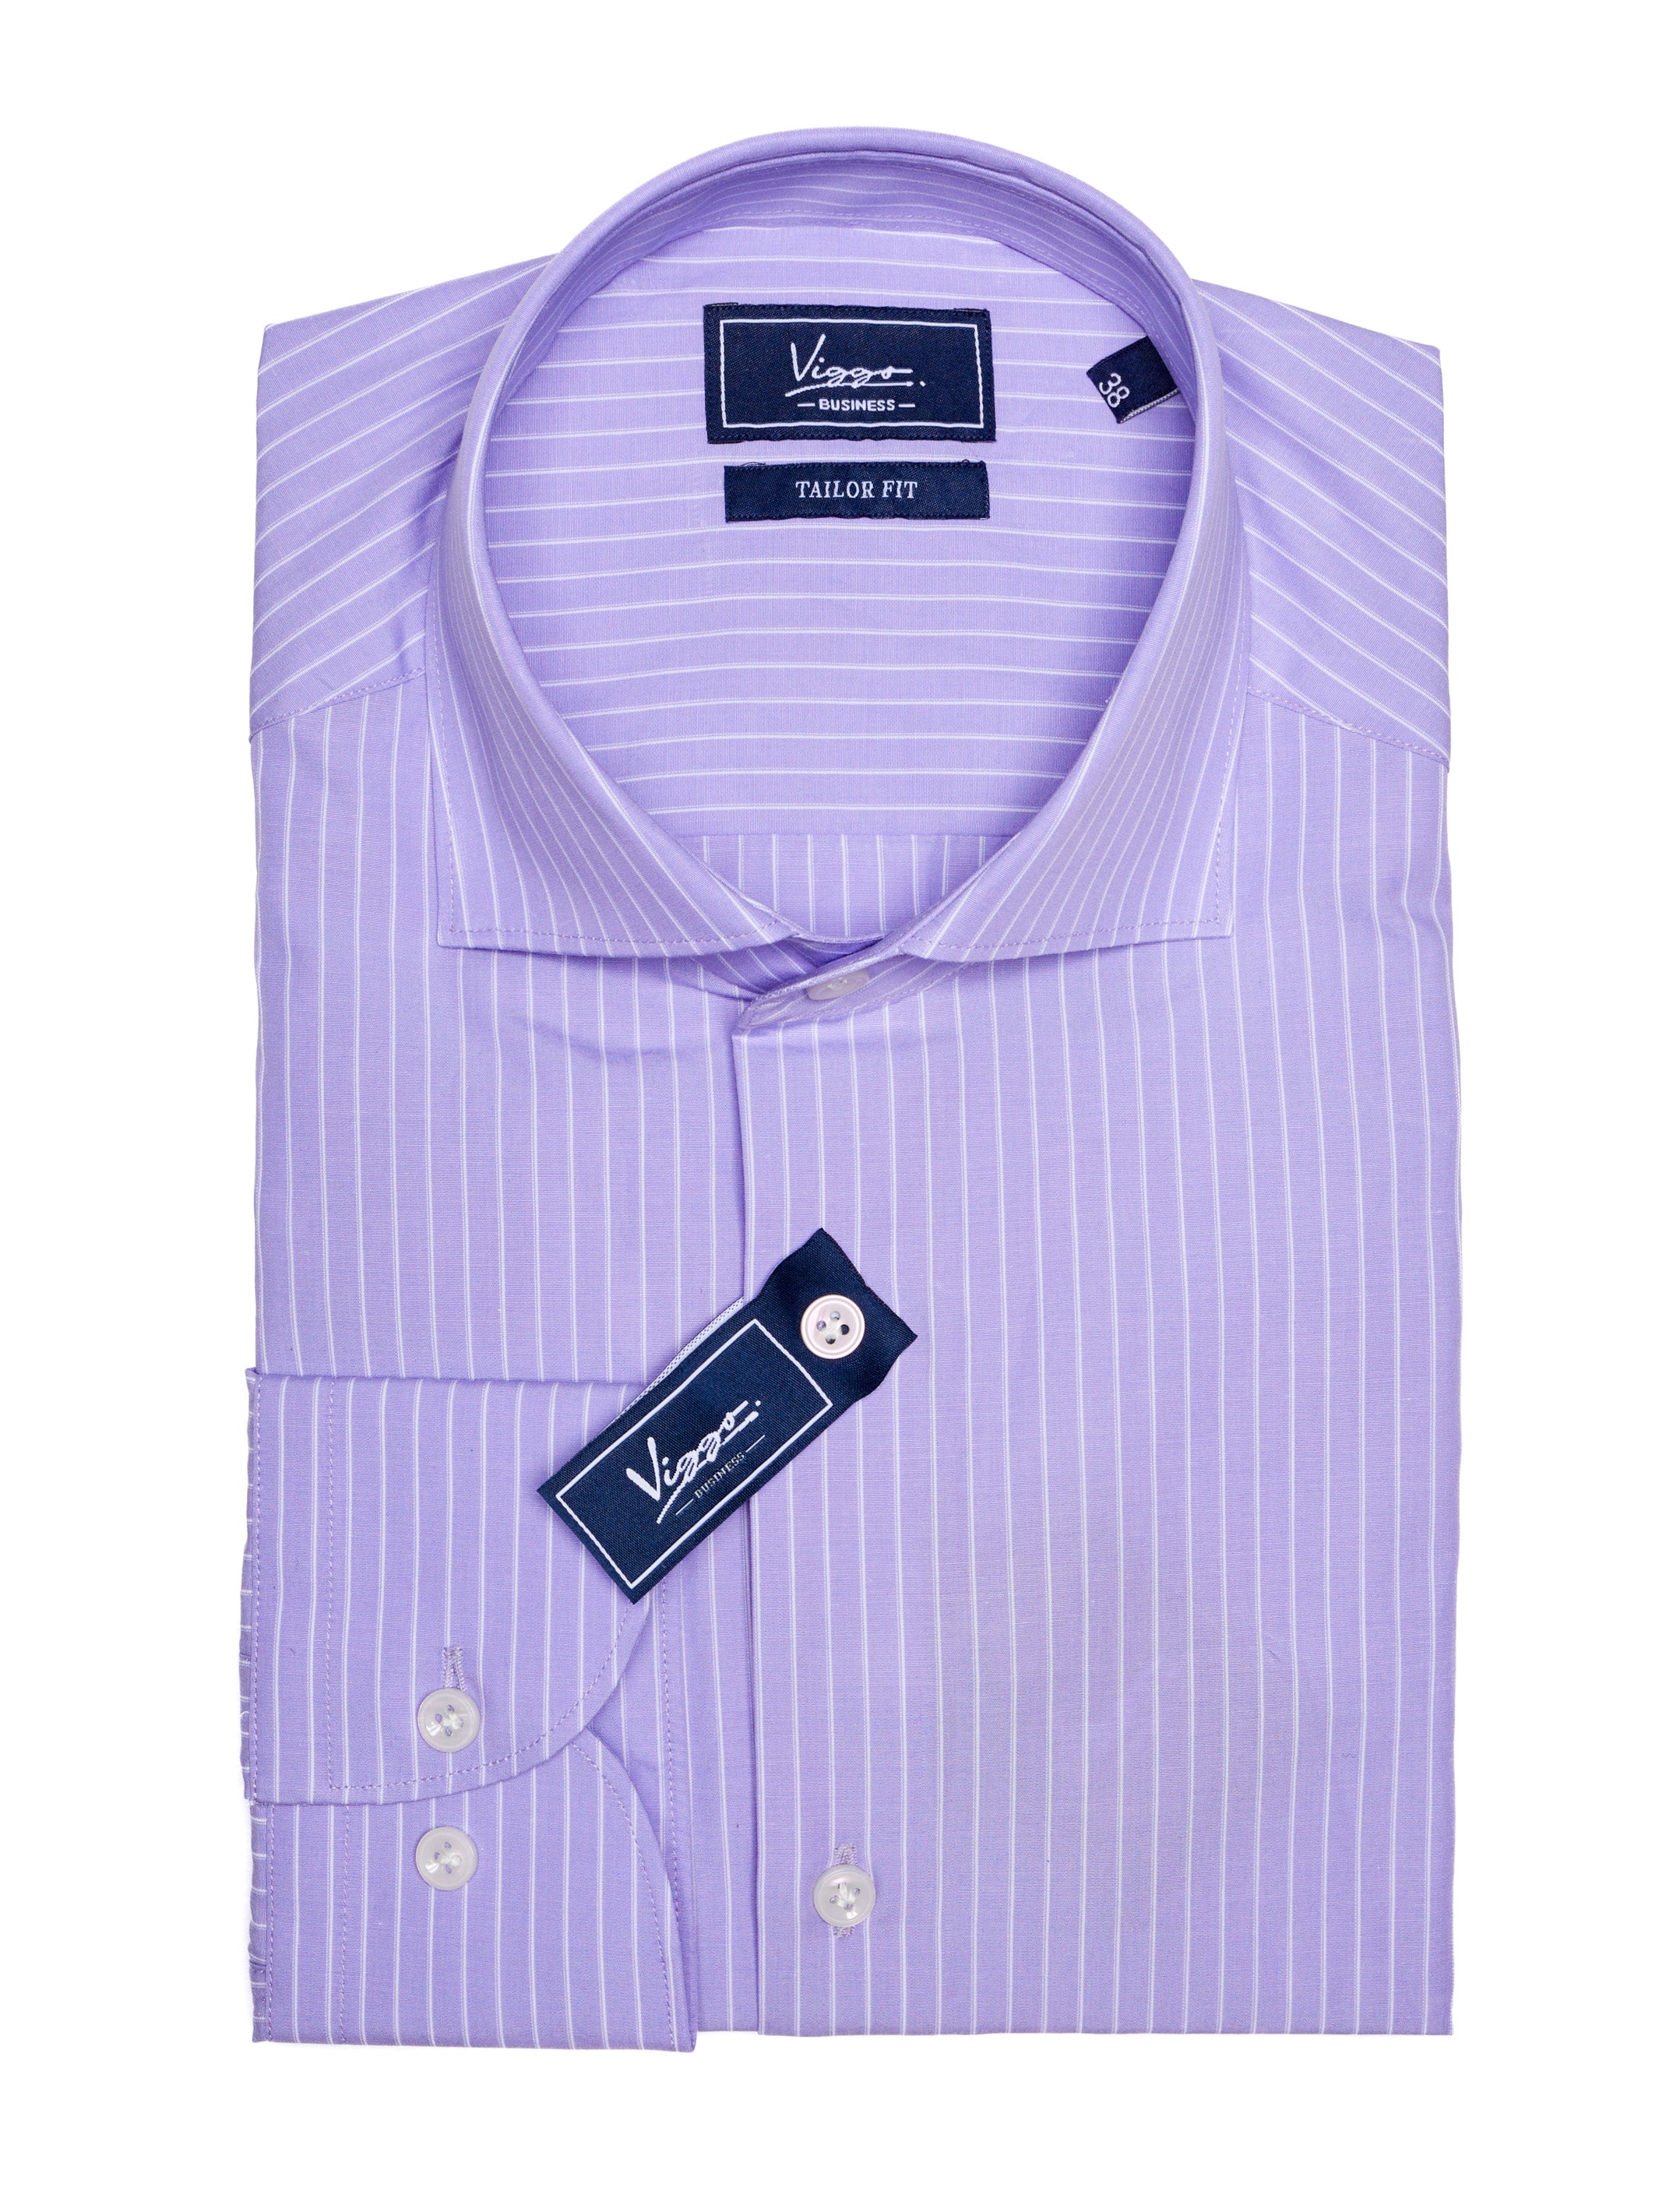 Lilac shirt with white stripes